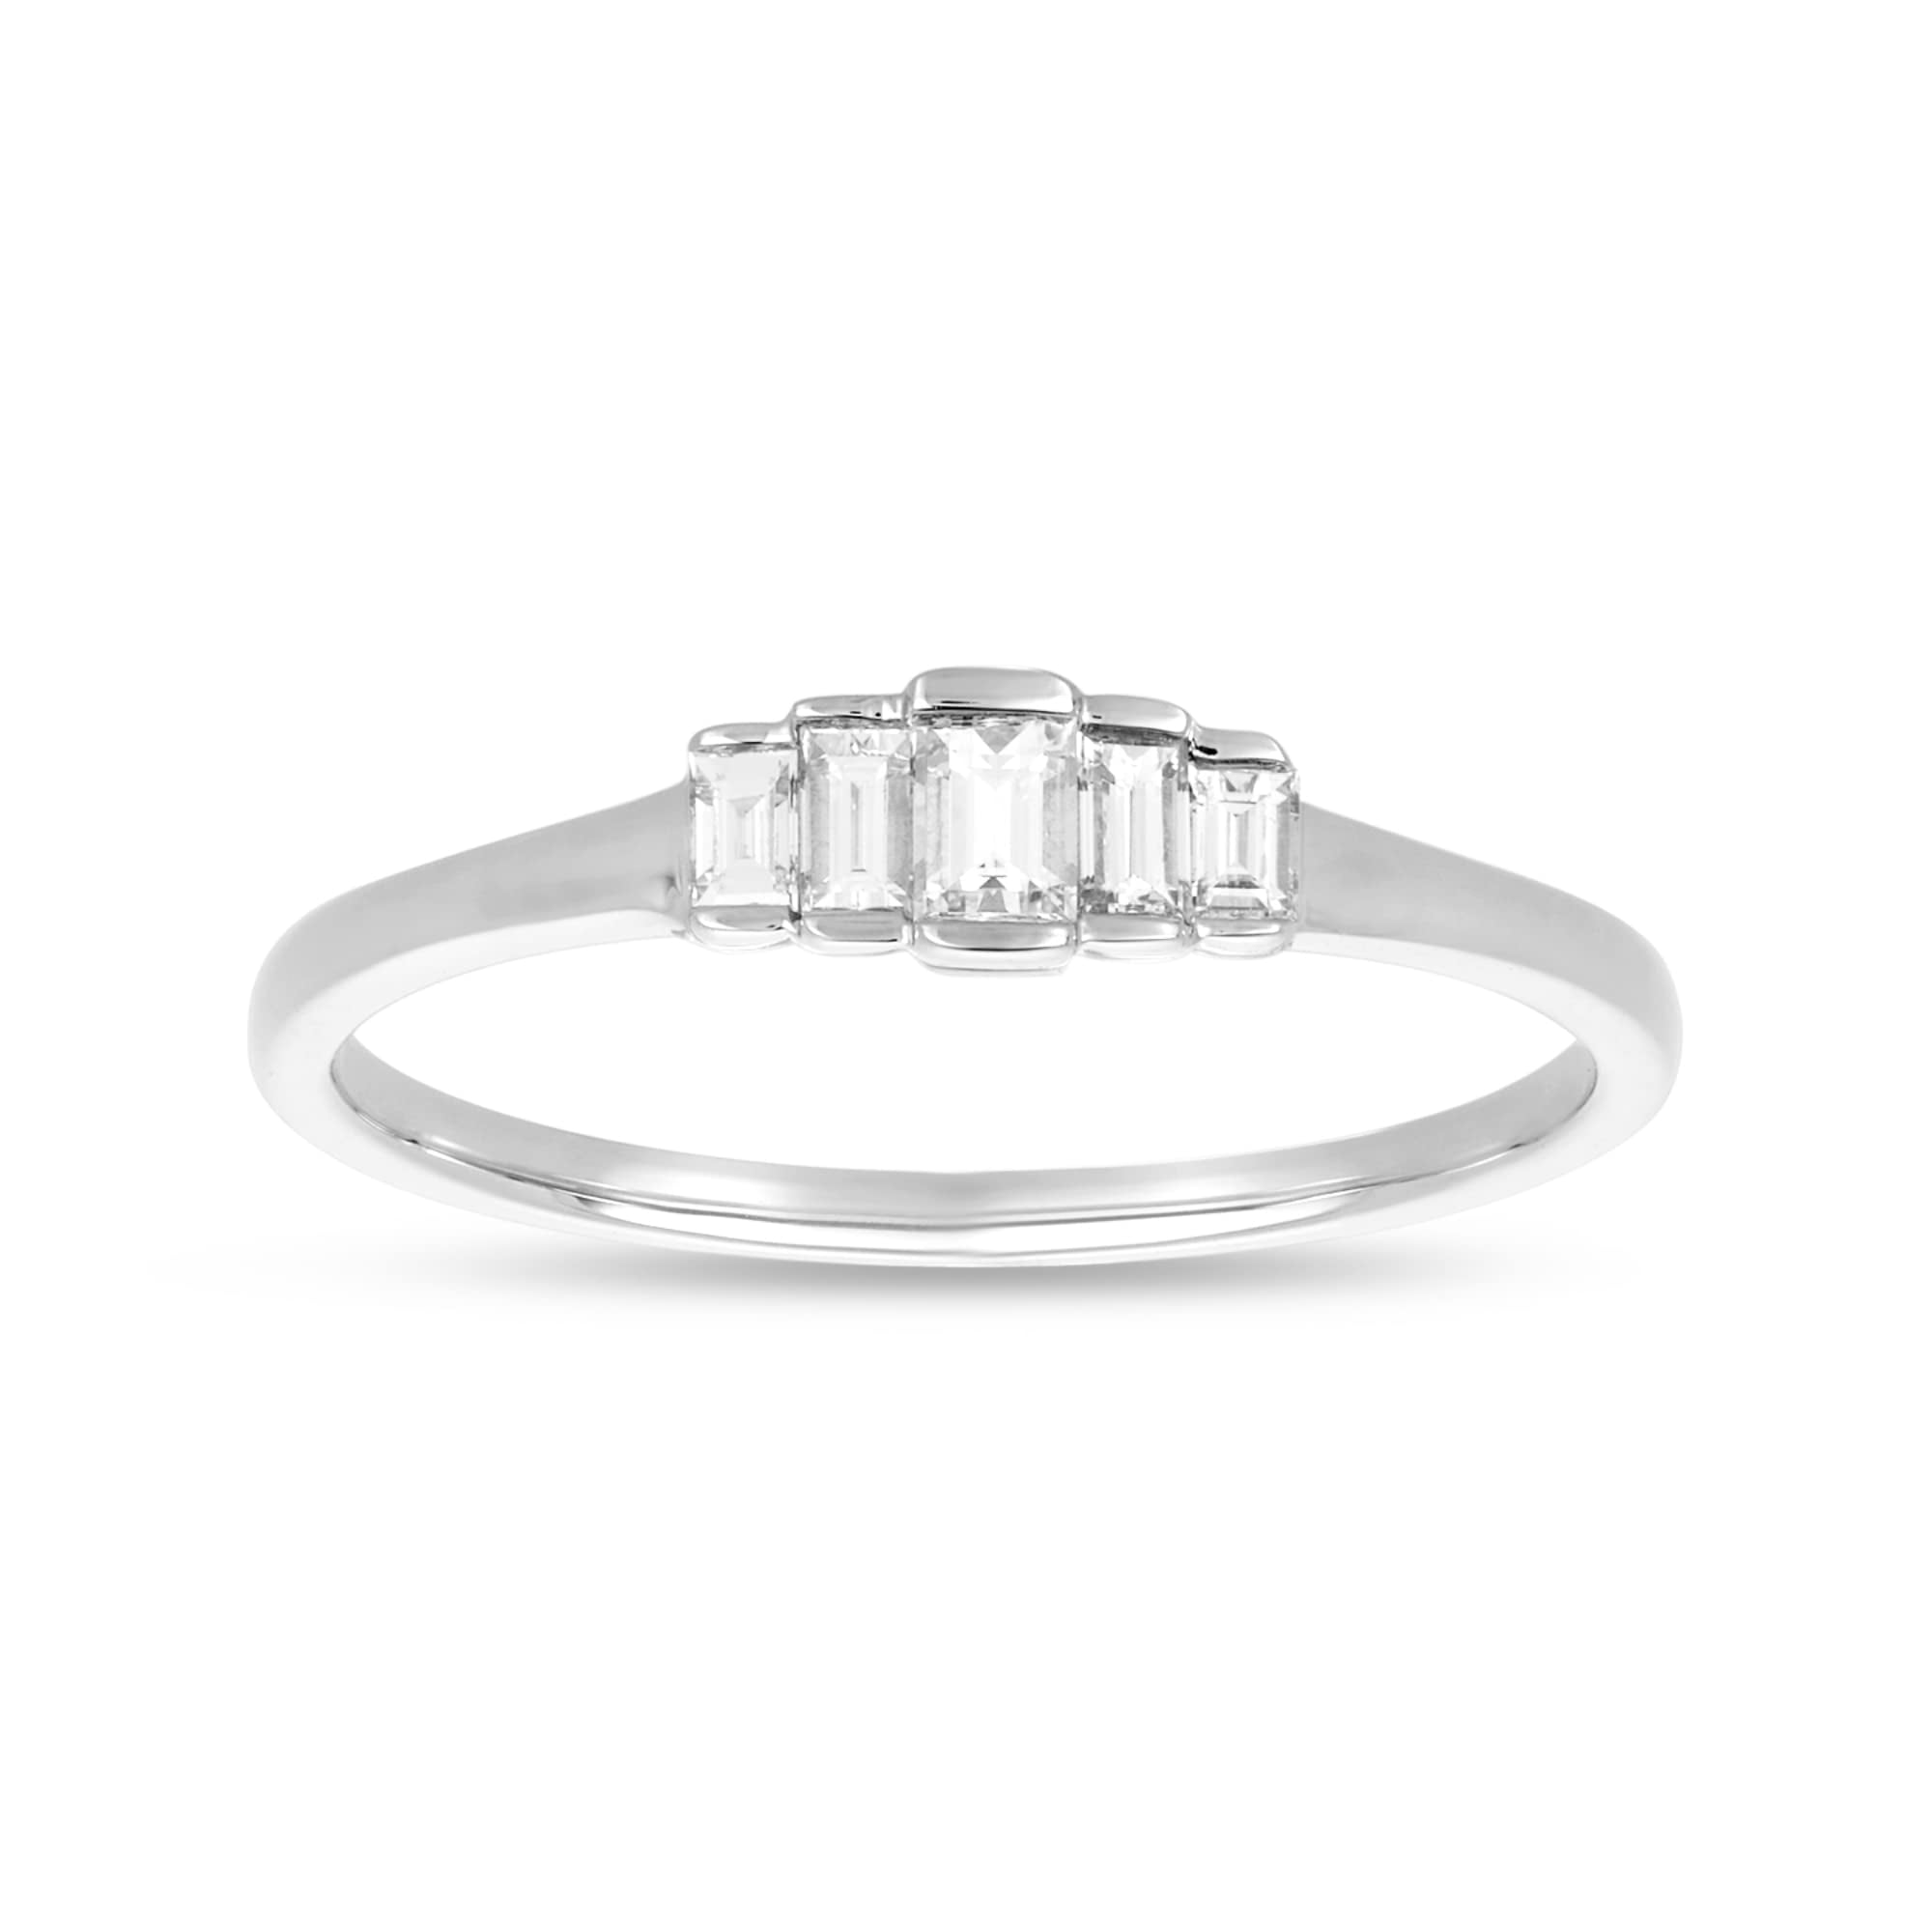 Details about   1.25CT Marquise & Baguette Diamond Wedding Ring Enhancer 14K Yellow Gold Finish 